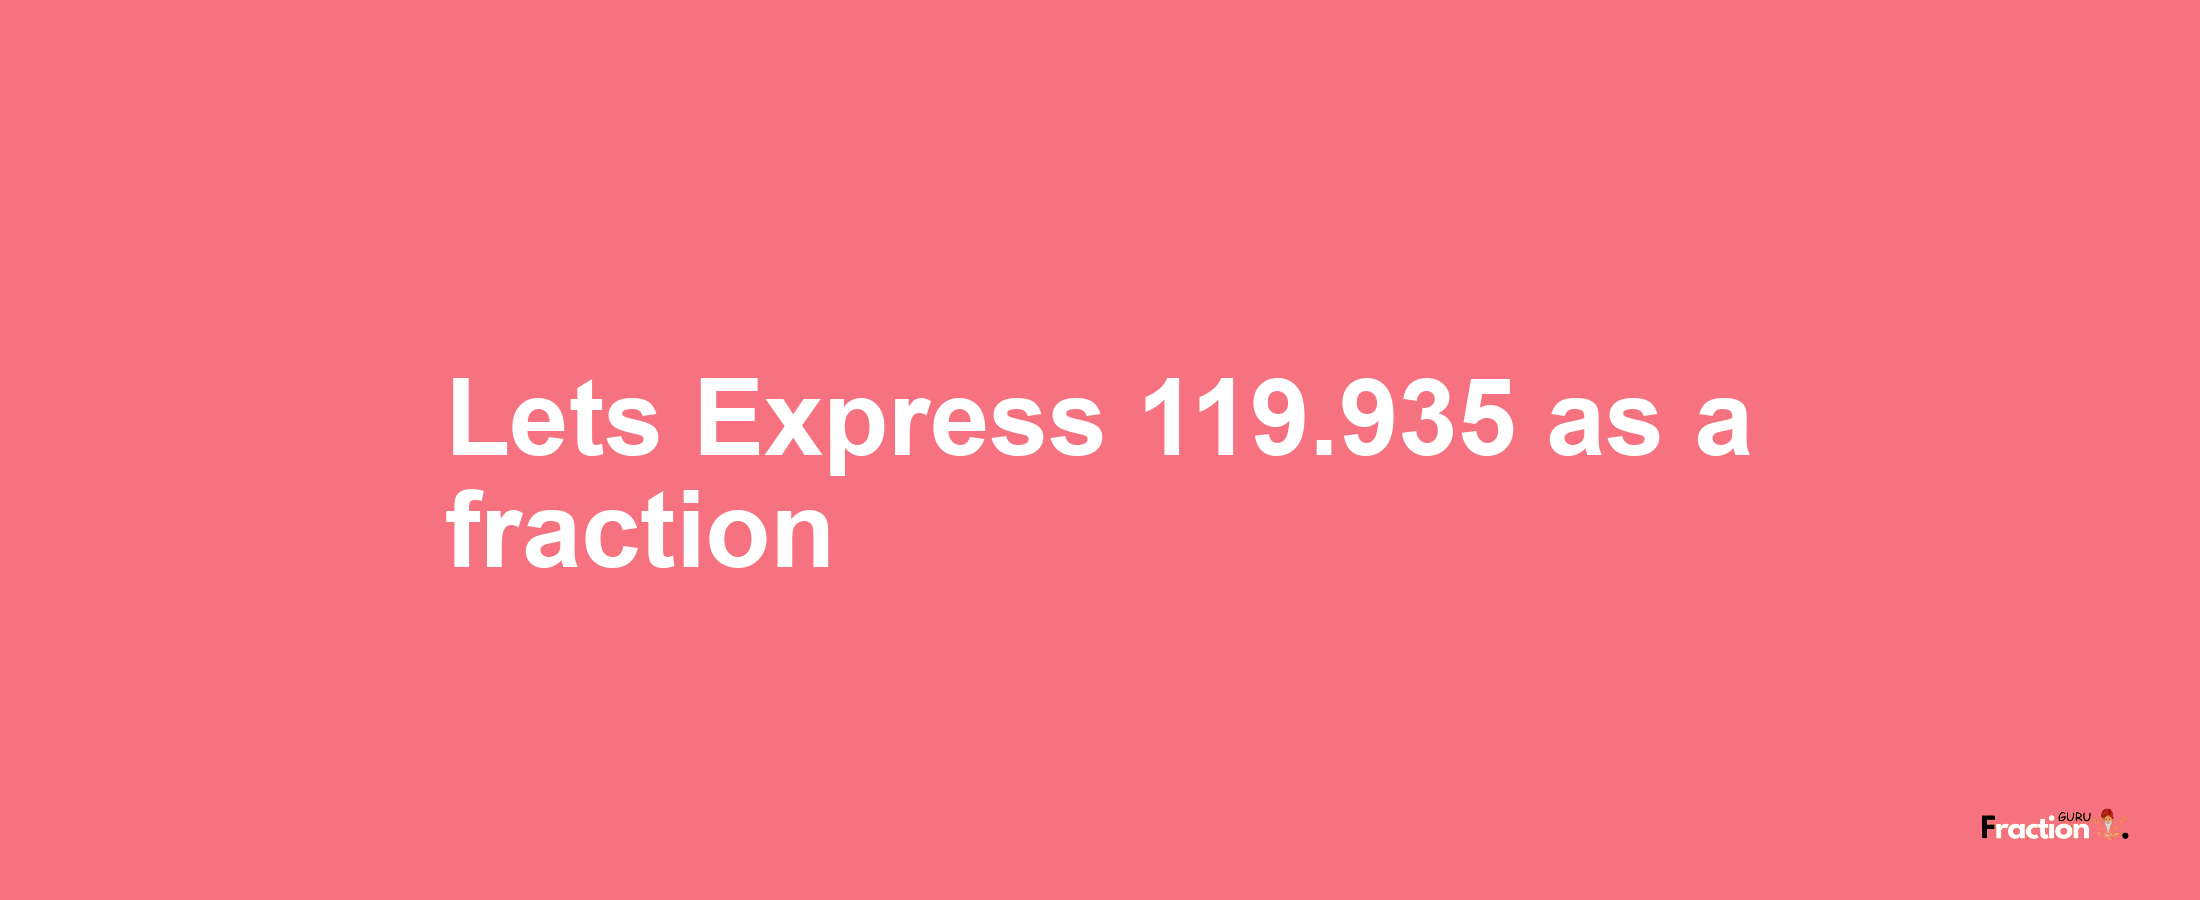 Lets Express 119.935 as afraction